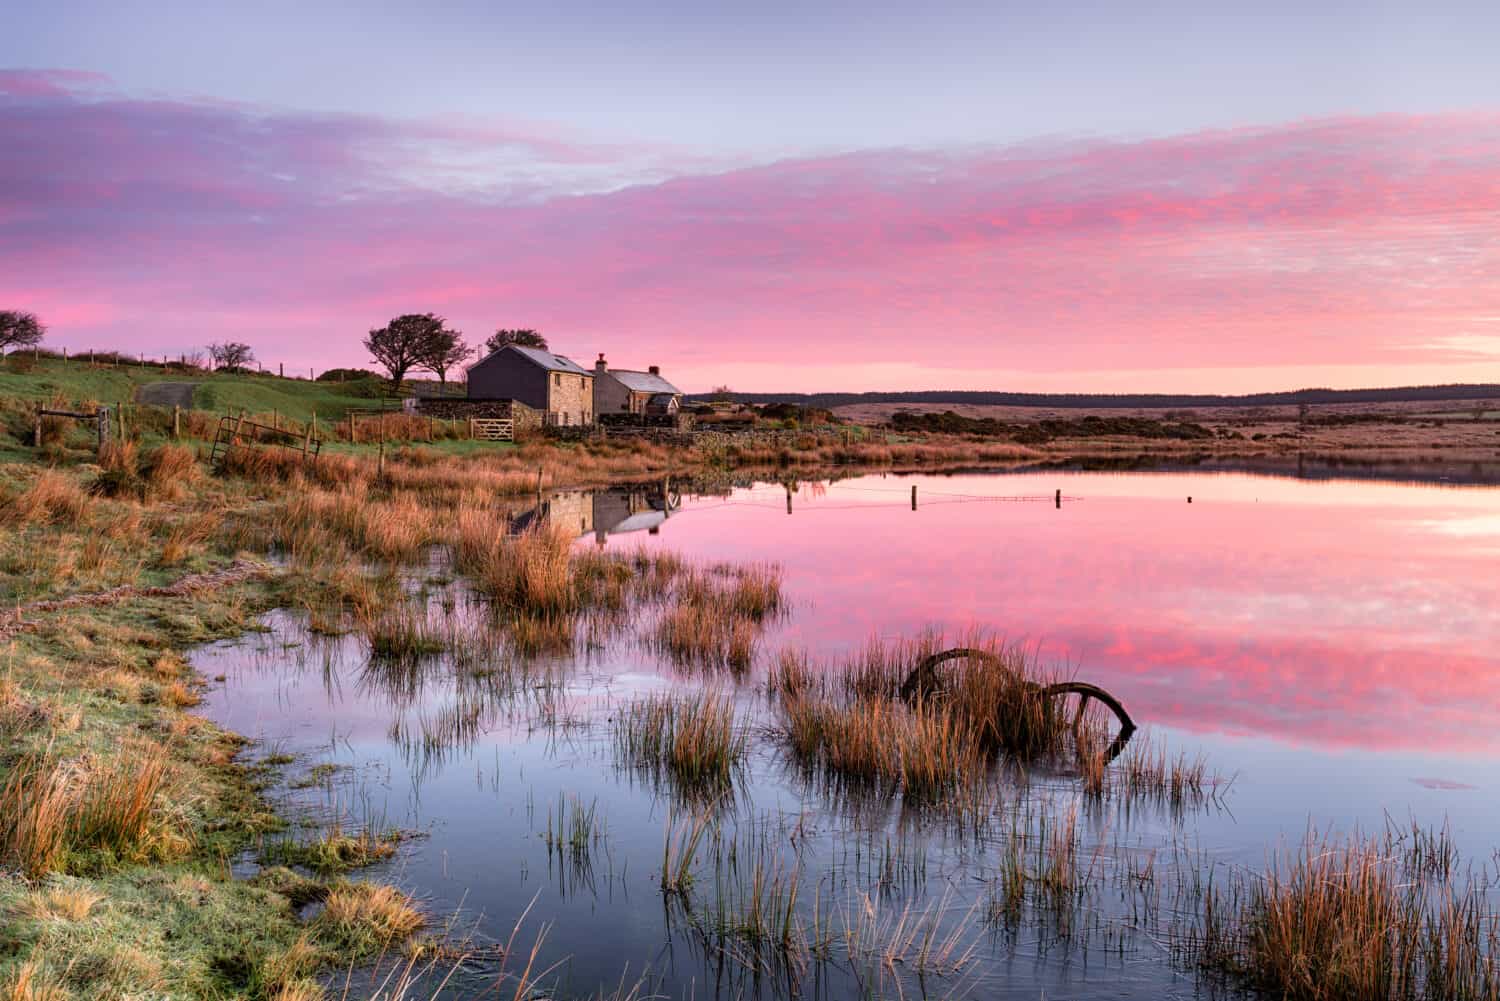 Stunning sunrise over Dozmary Pool on Bodmin Moor in Cornwall, a small natural lake steeped in Arthurian legend and reputedly the haunt of the Lady of the Lake